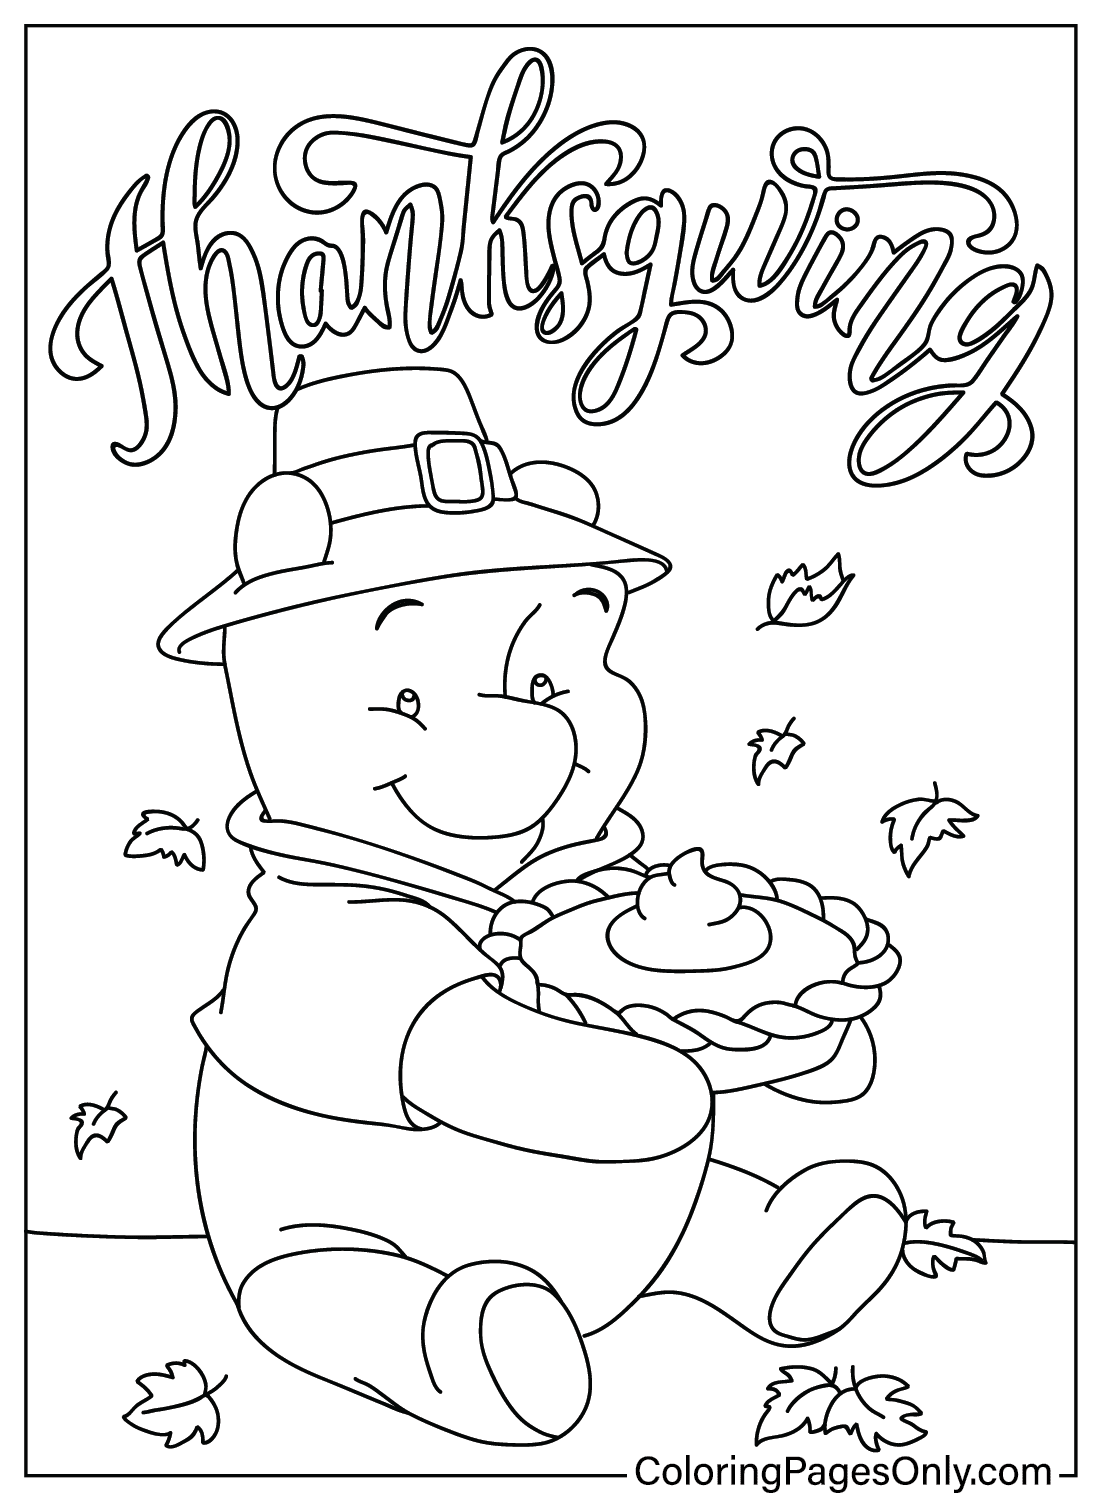 Pooh Thanksgiving Coloring Page